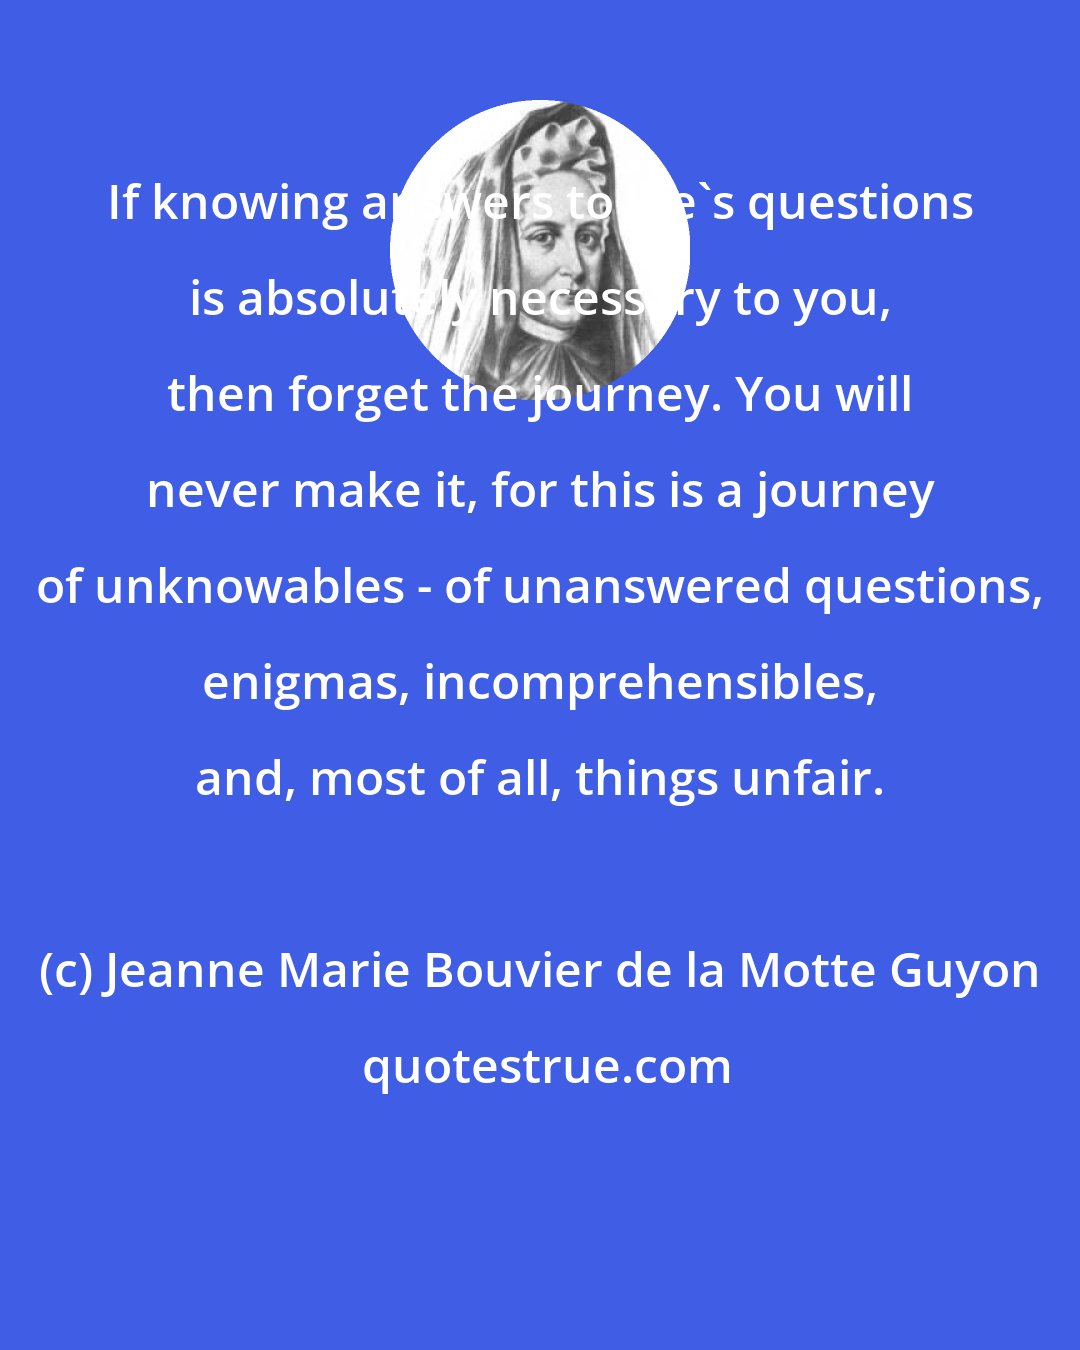 Jeanne Marie Bouvier de la Motte Guyon: If knowing answers to life's questions is absolutely necessary to you, then forget the journey. You will never make it, for this is a journey of unknowables - of unanswered questions, enigmas, incomprehensibles, and, most of all, things unfair.